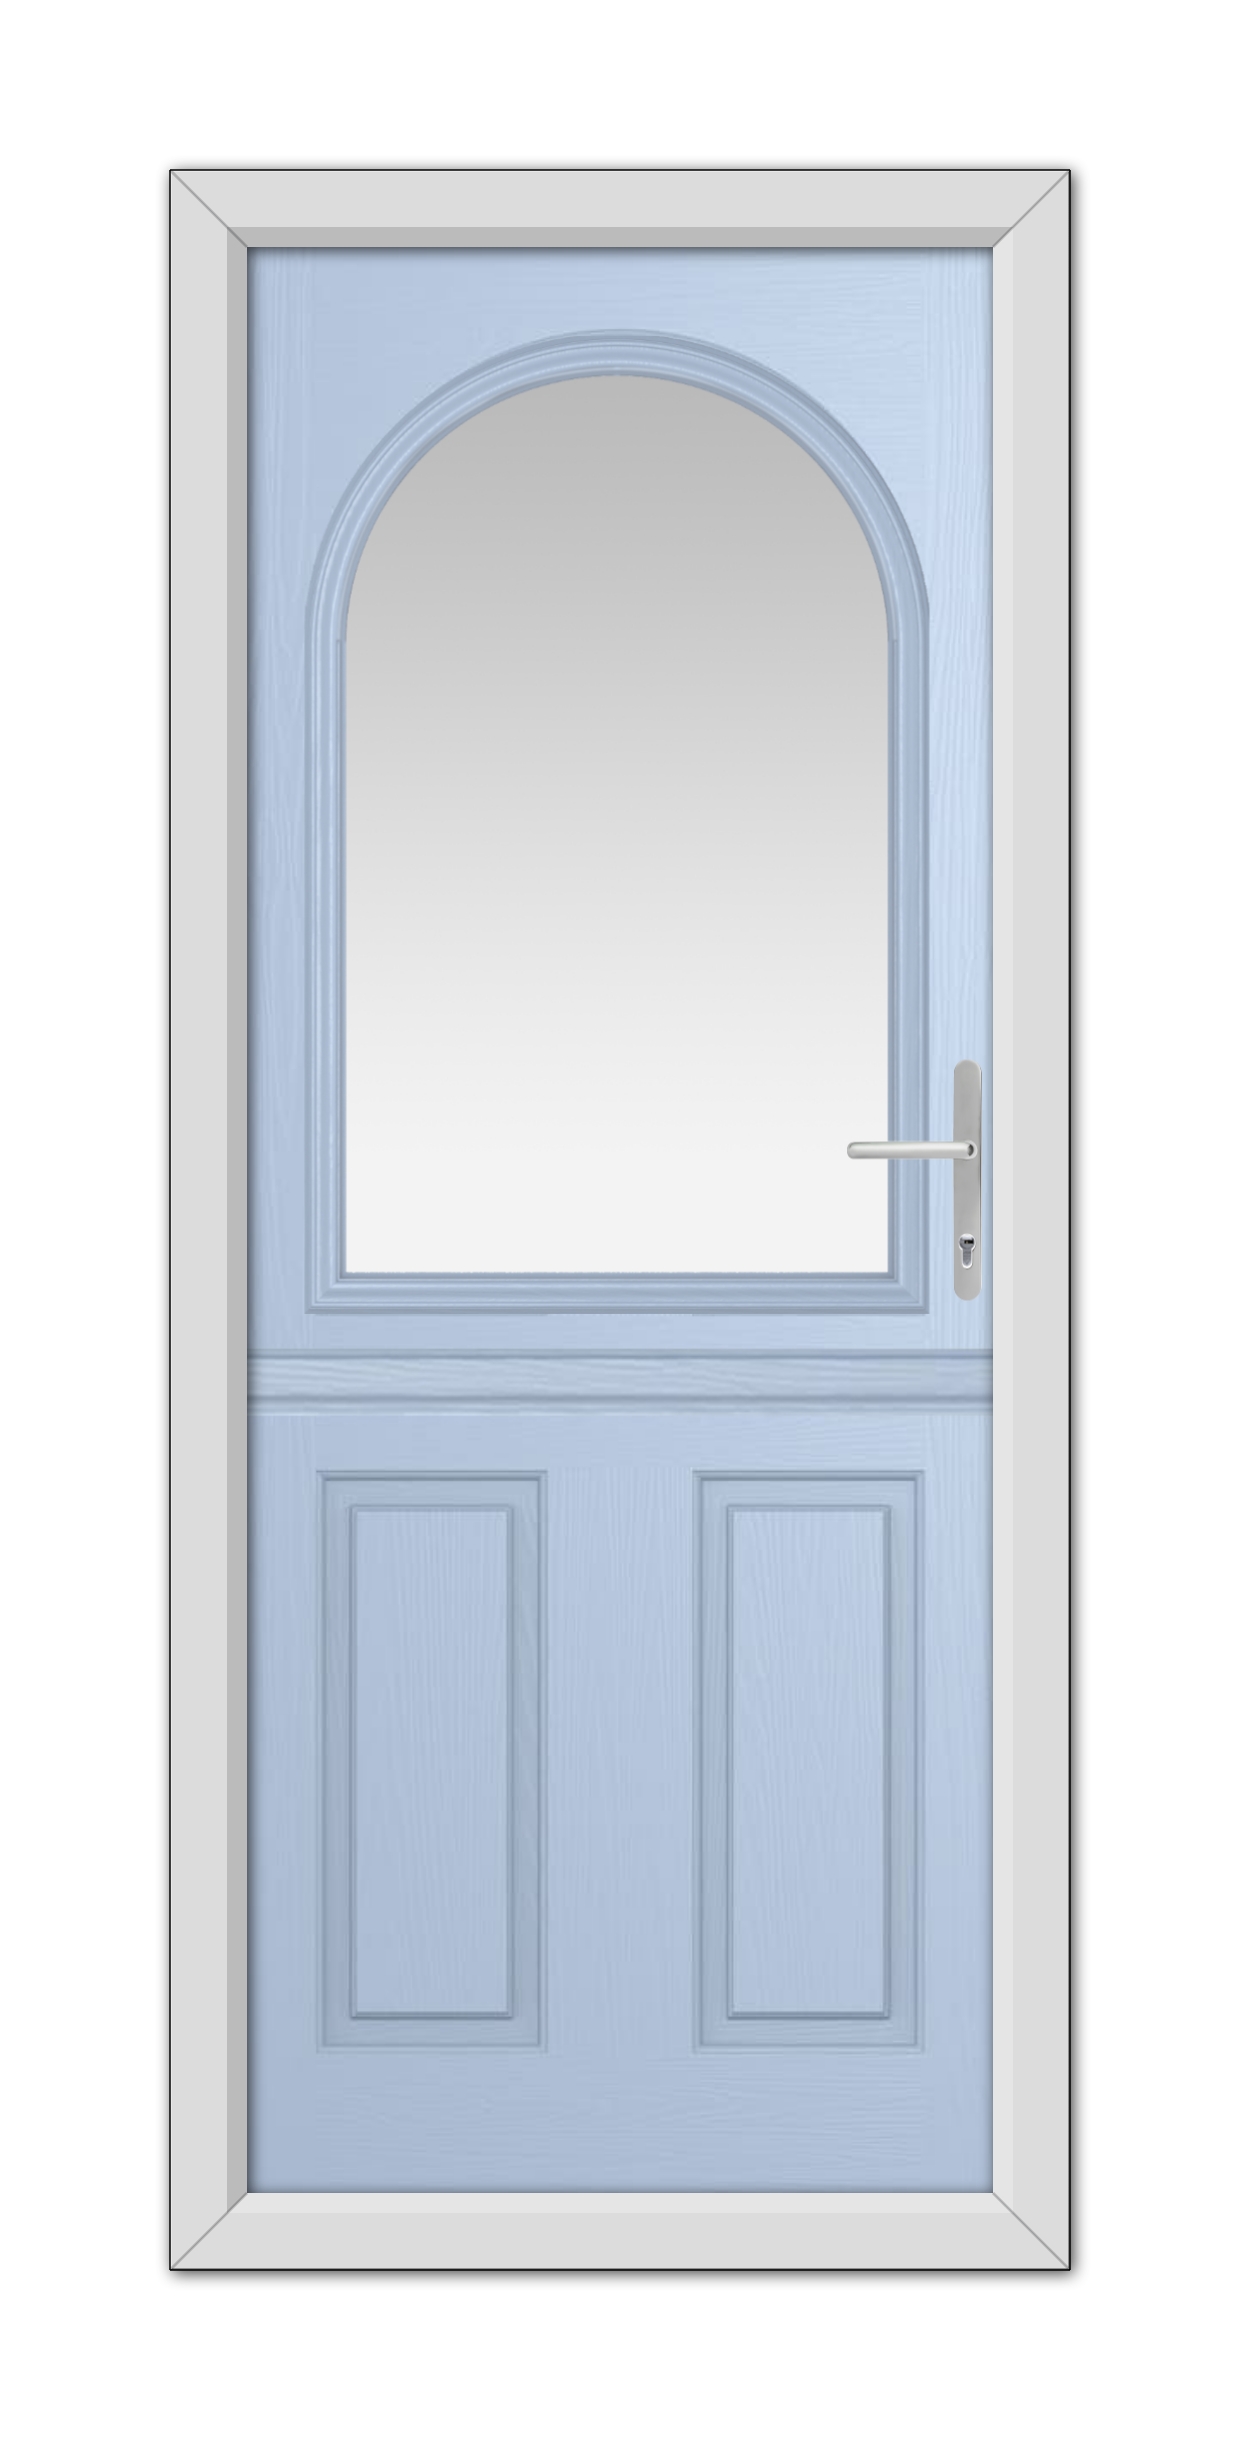 A Duck Egg Blue Grafton Stable Composite Door with an arched window at the top, set in a white frame, featuring a modern handle on the right side.